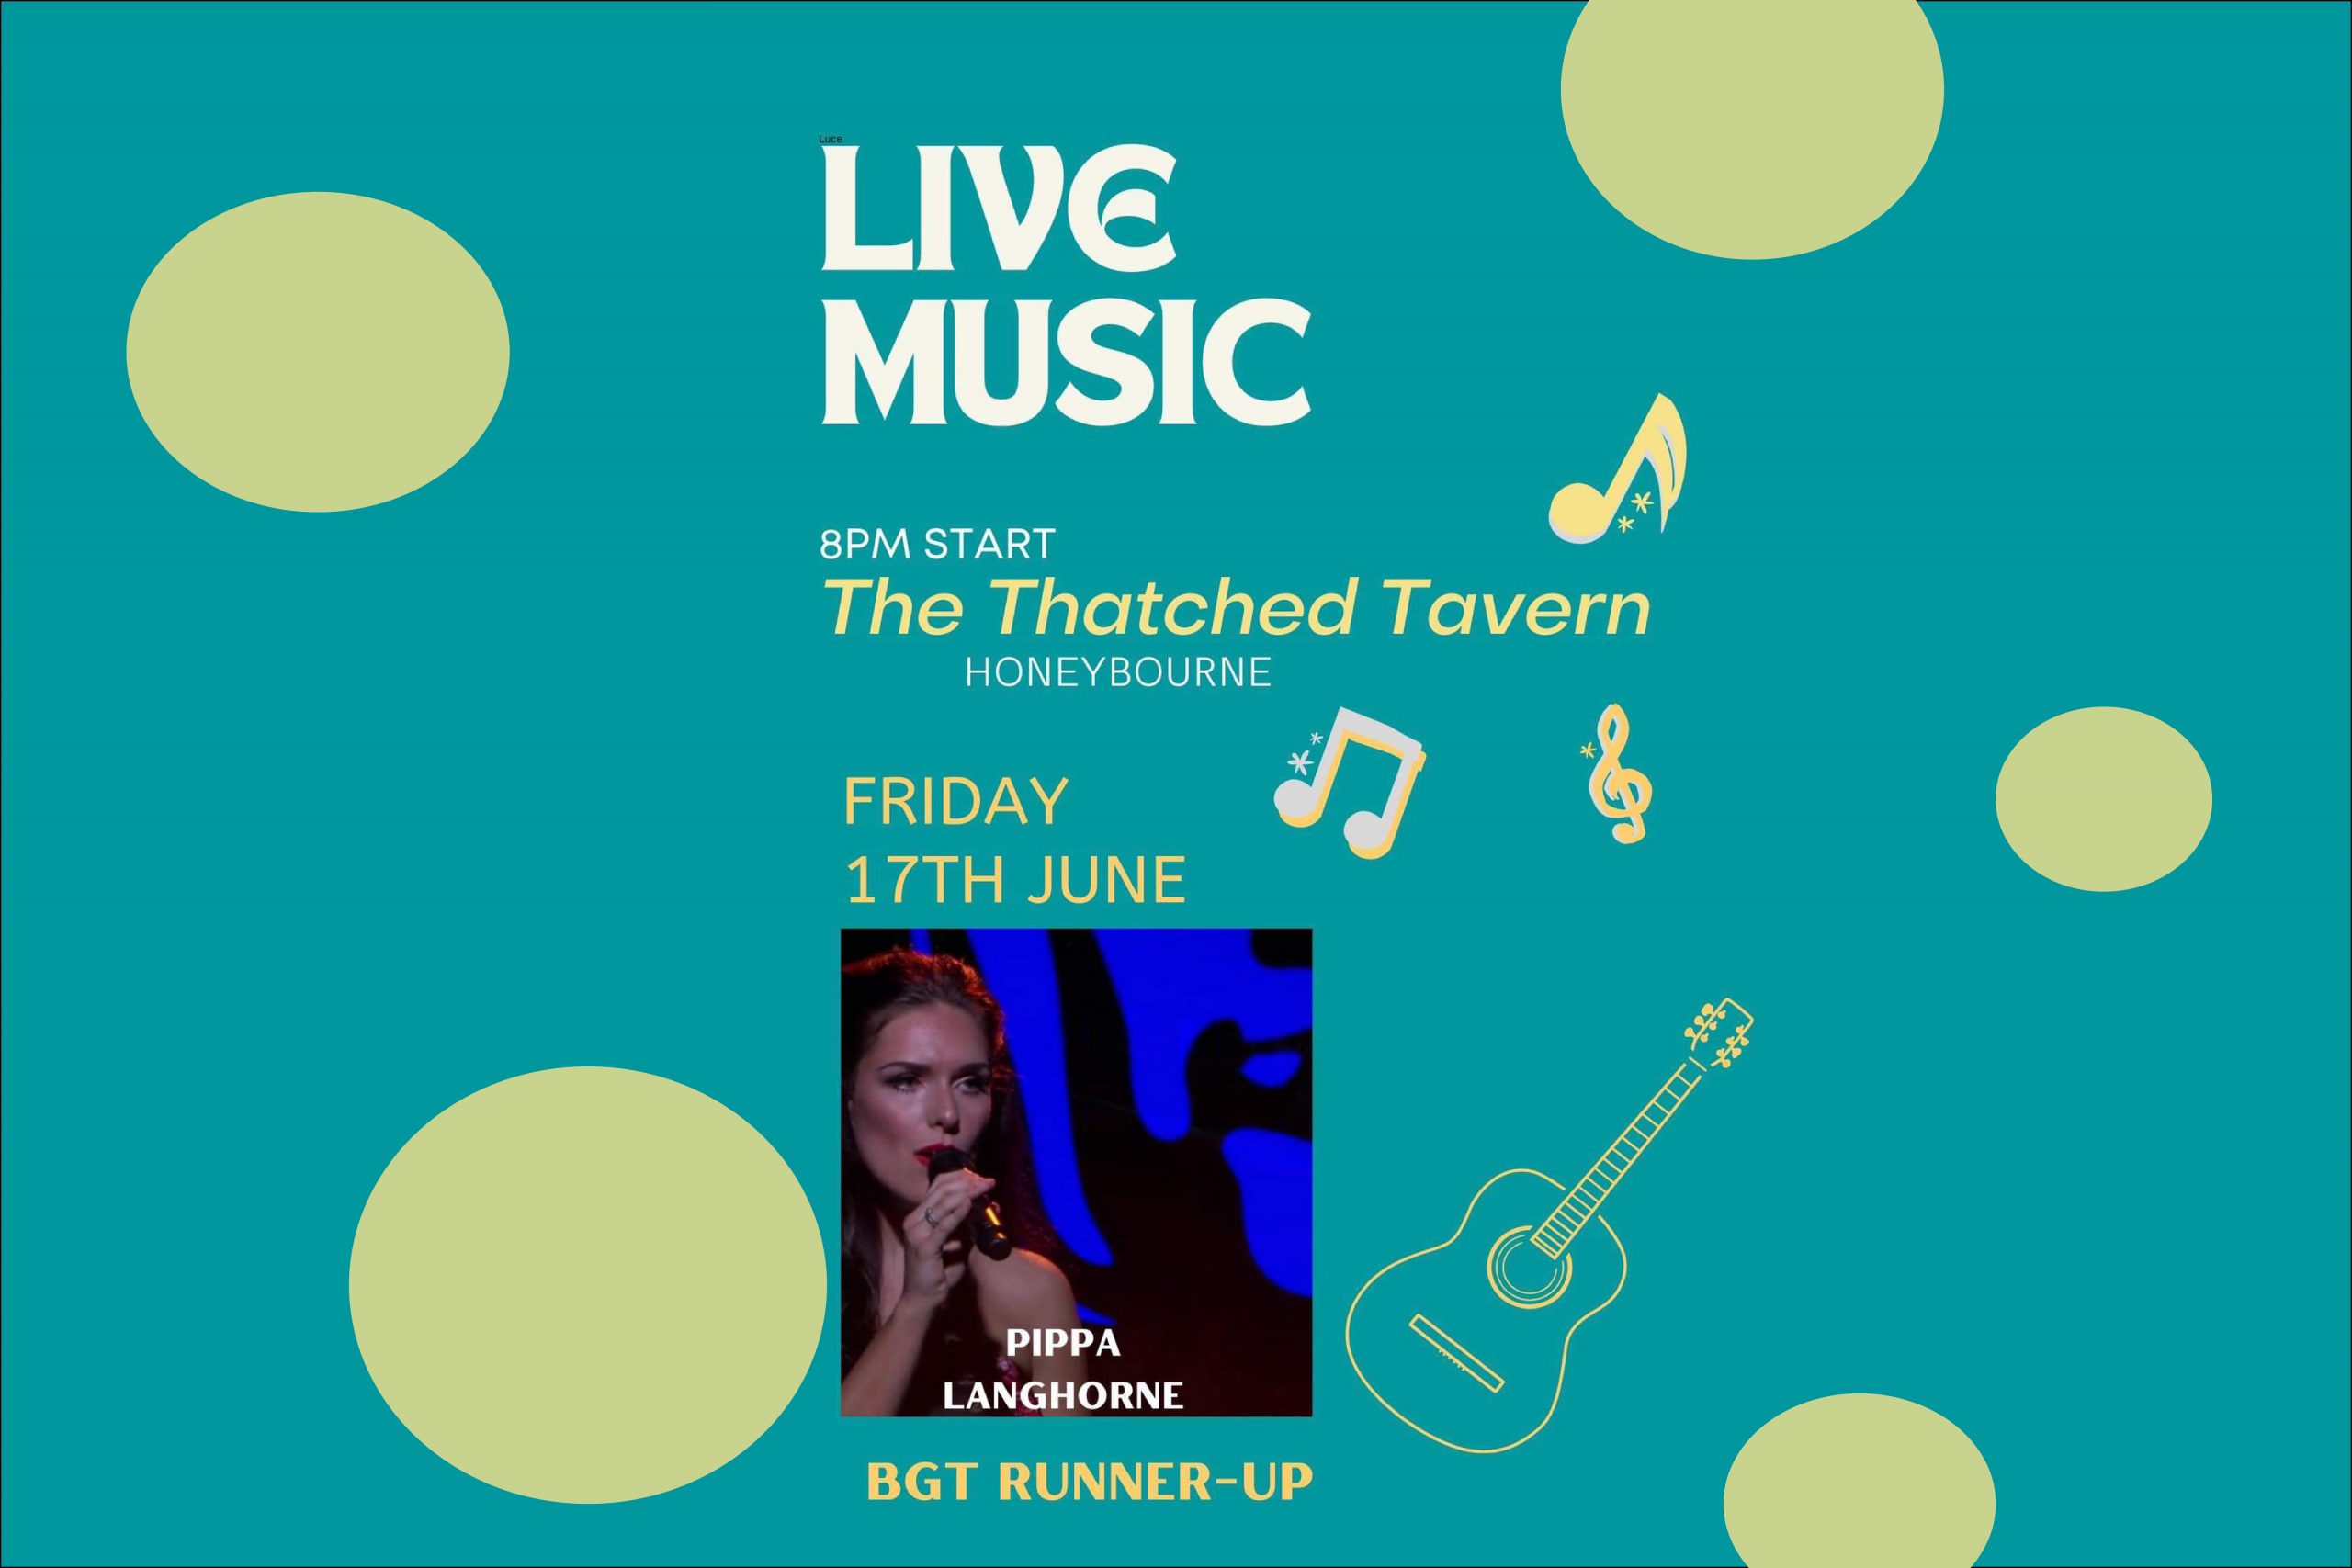 Pippa Langhorne at The Thatched Tavern Honeybourne